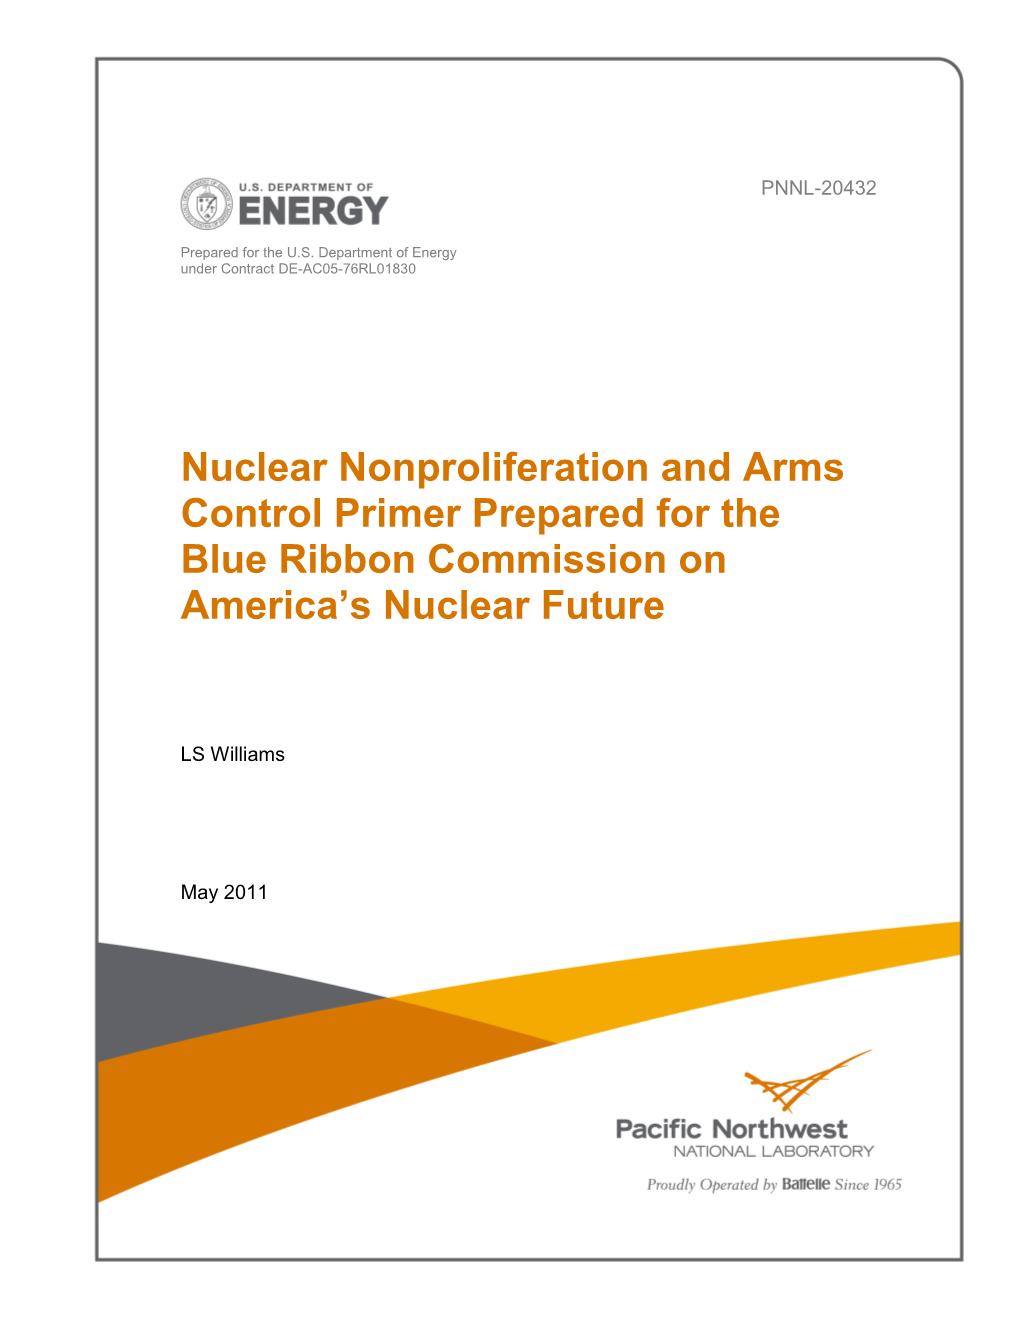 Nuclear Nonproliferation and Arms Control Primer Prepared for the Blue Ribbon Commission on America’S Nuclear Future